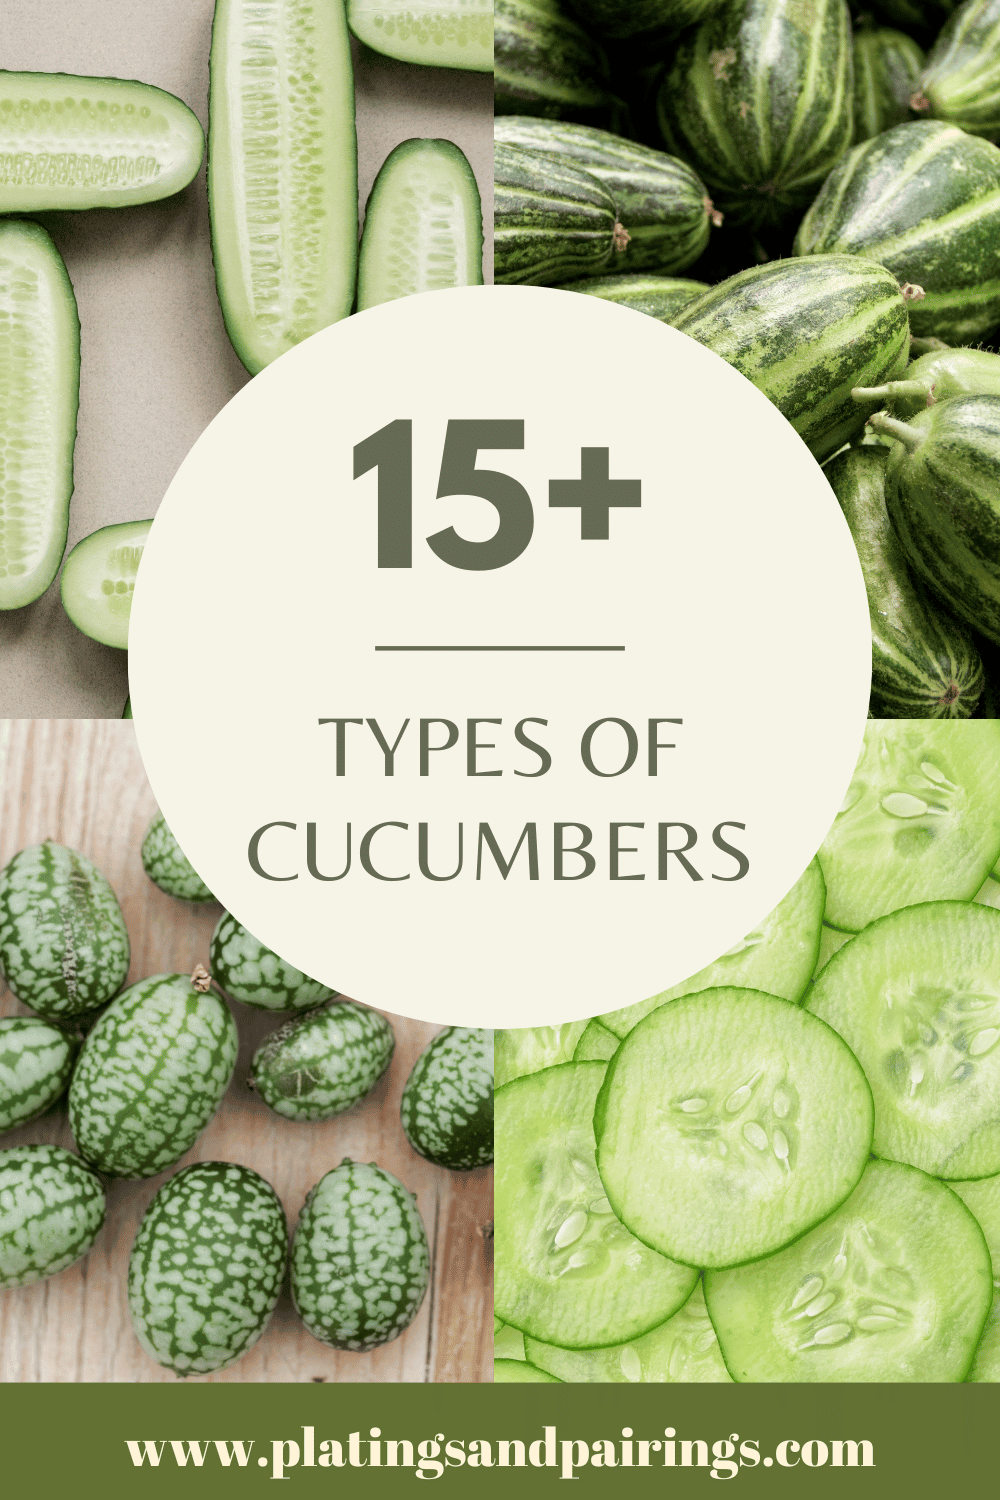 Collage of different types of cucumbers with text overlay.